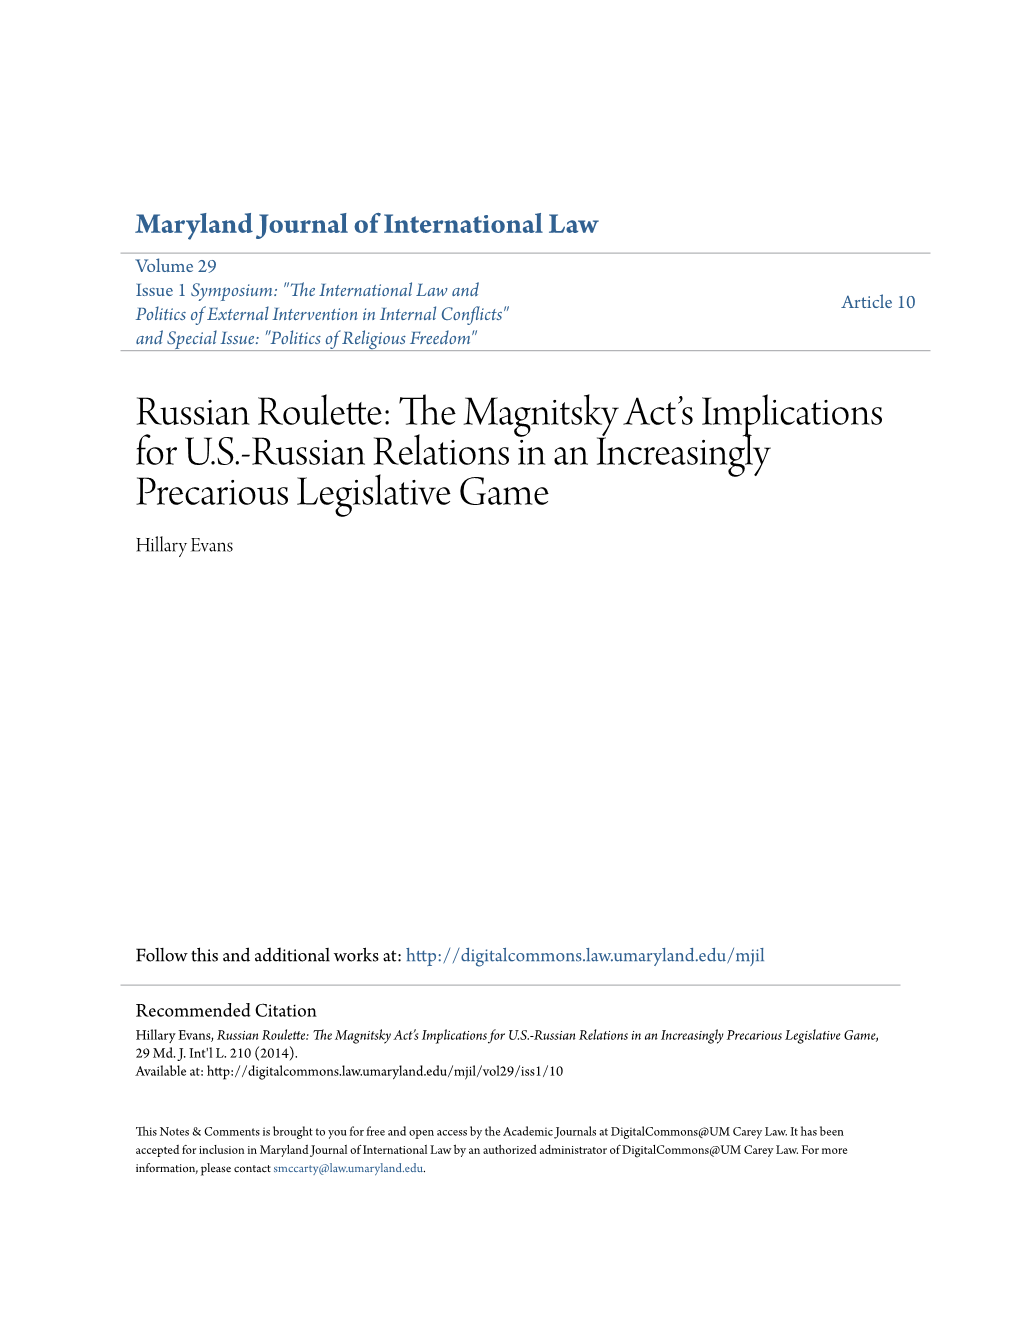 Russian Roulette: the Am Gnitsky Act’S Implications for U.S.-Russian Relations in an Increasingly Precarious Legislative Game Hillary Evans